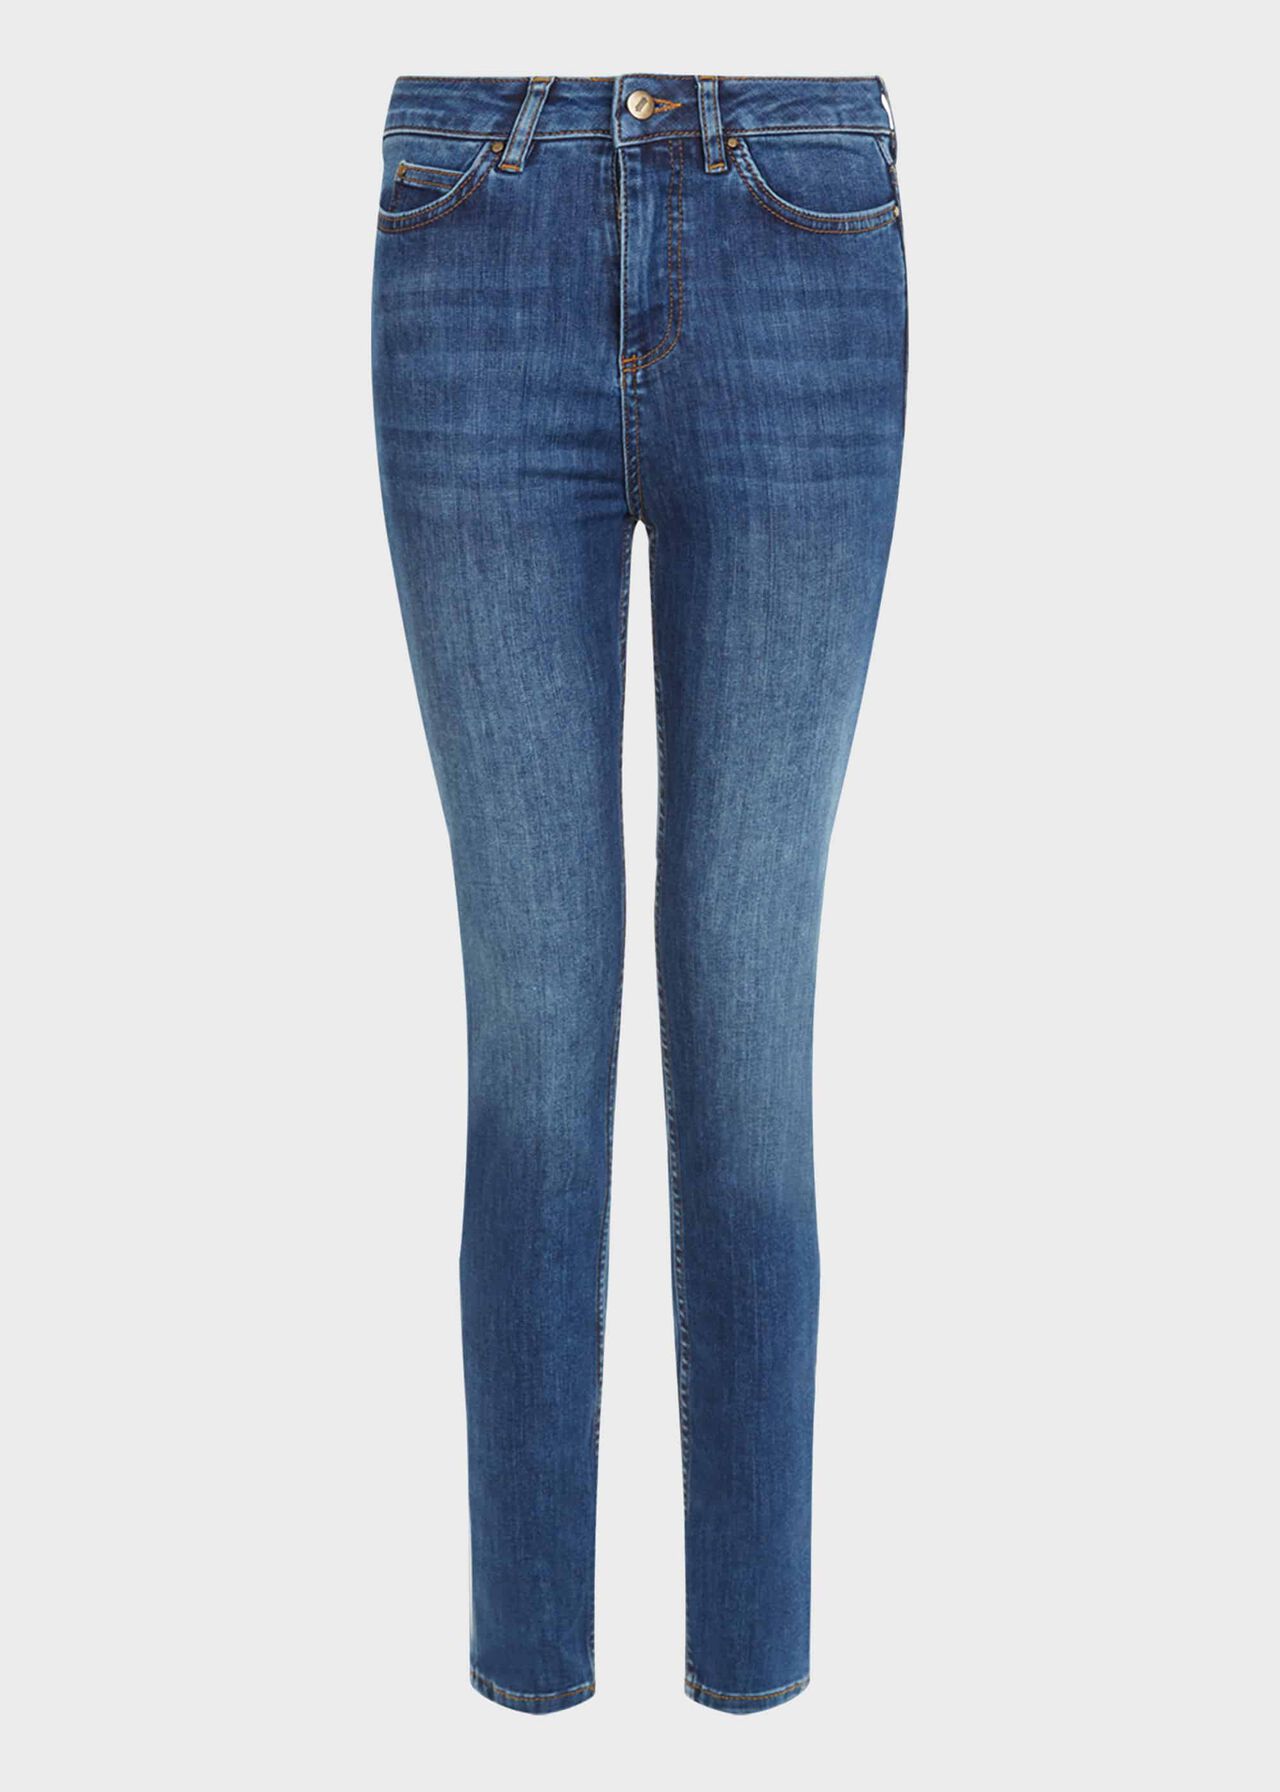 Gia Sculpting Jeans With Stretch, Mid Wash, hi-res